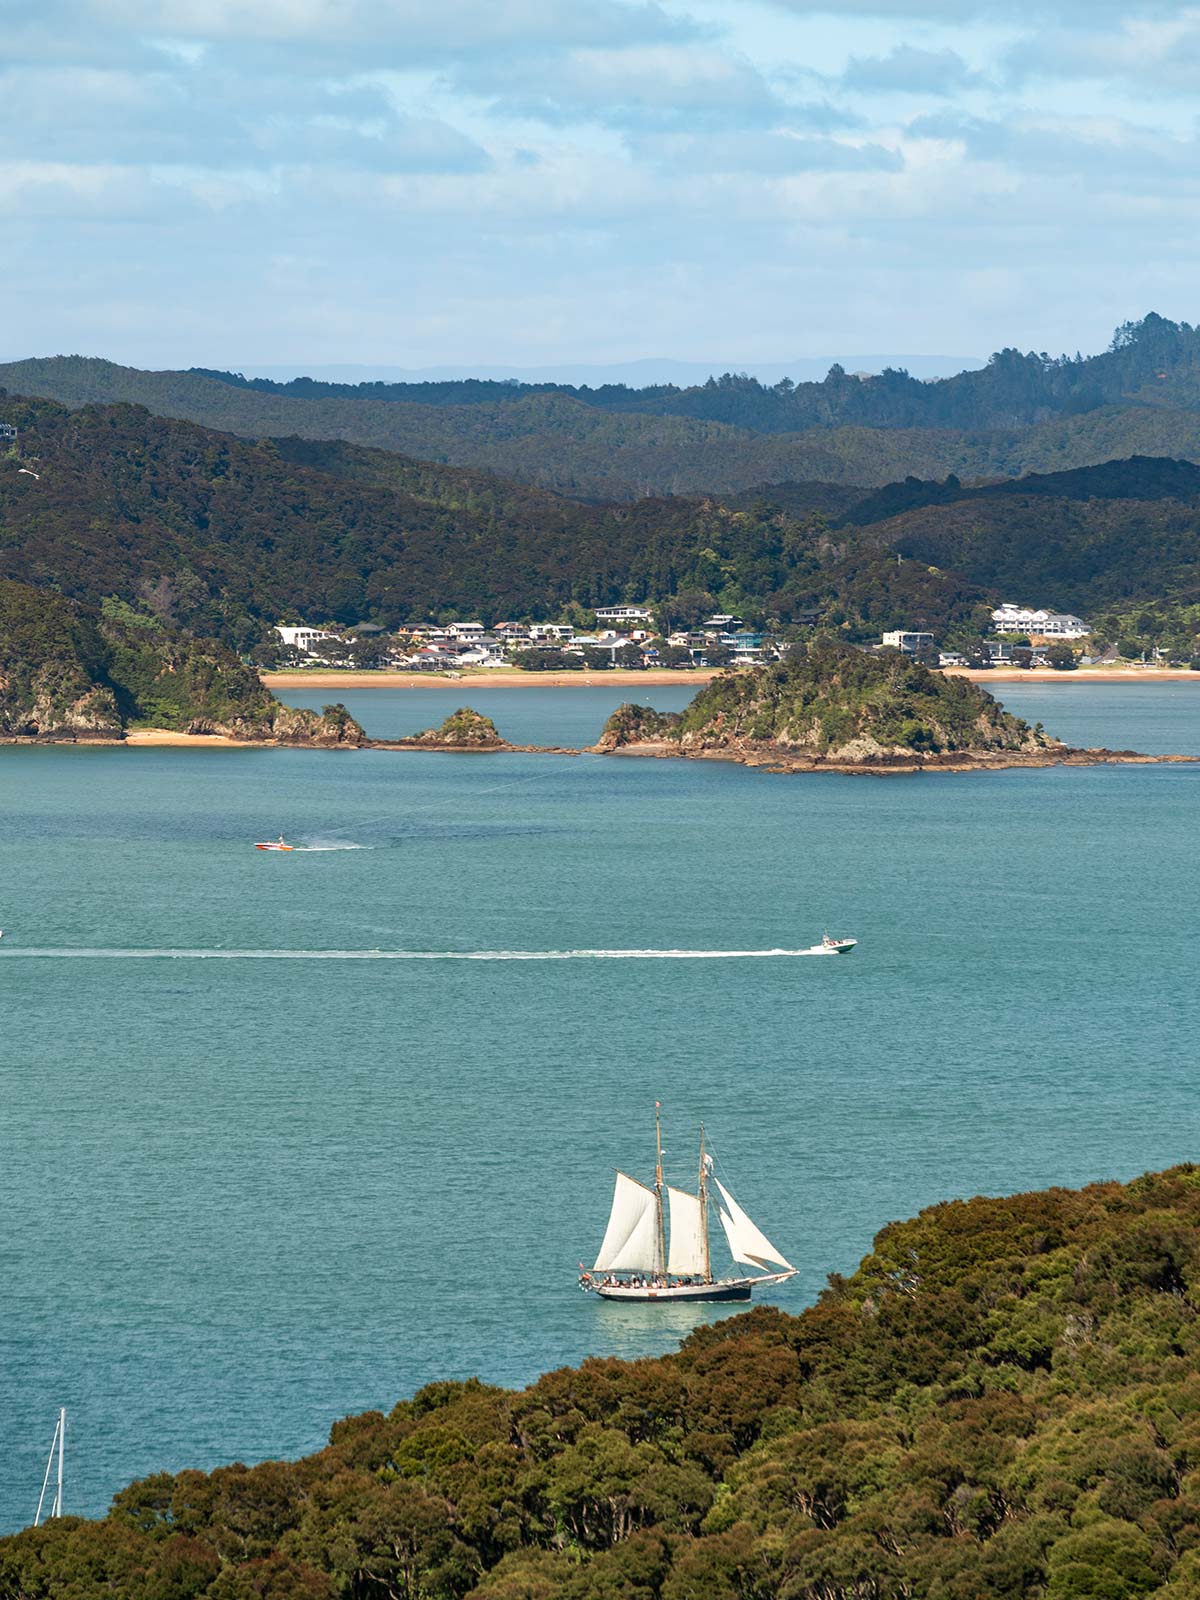 Voilier, Russell, Paihia, Bay of Islands, Nouvelle-Zélande / Ship, Russell, Paihia, Bay of Islands, New Zealand, NZ